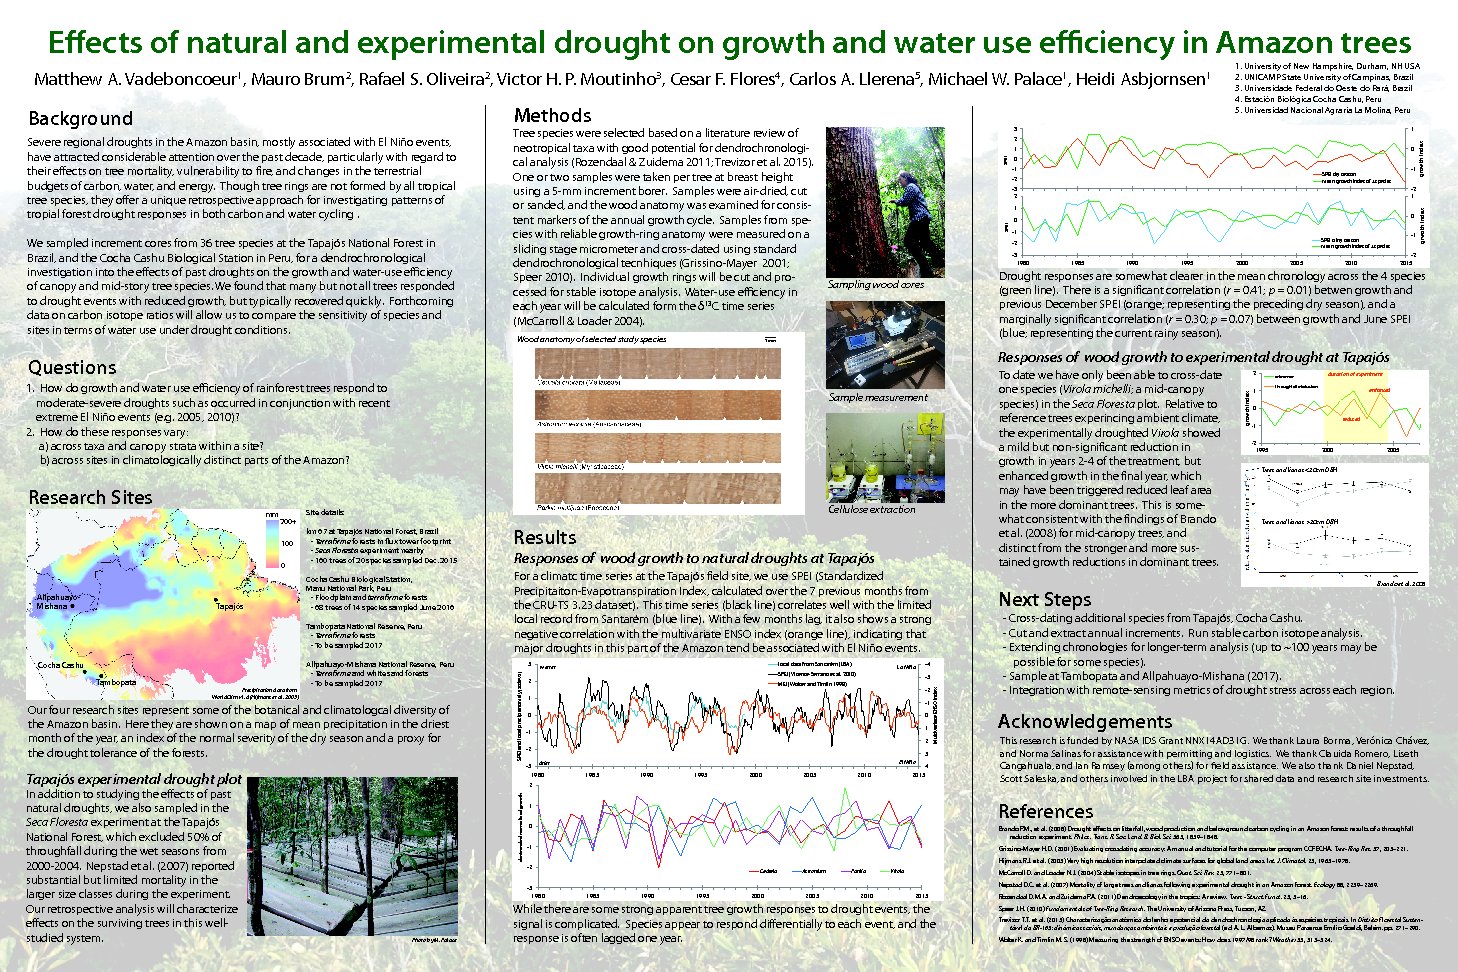 Effects Of Natural And Experimental Drought On Growth And Water Use Efficiency In Amazon Trees by mattvad